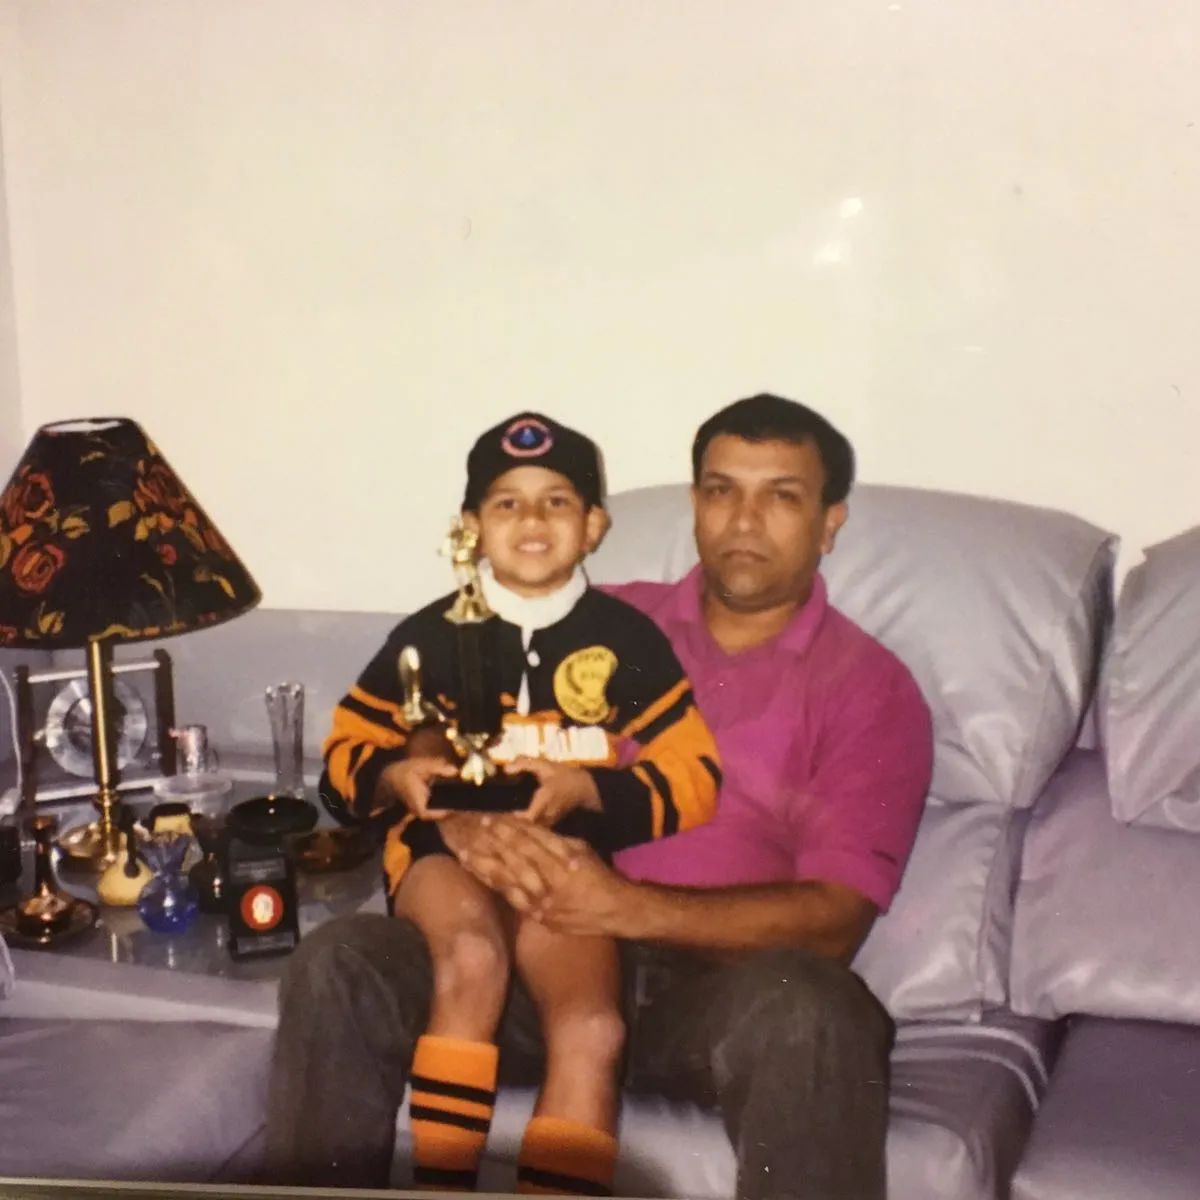 A throwback picture of Usman Khawaja sitting together with his father